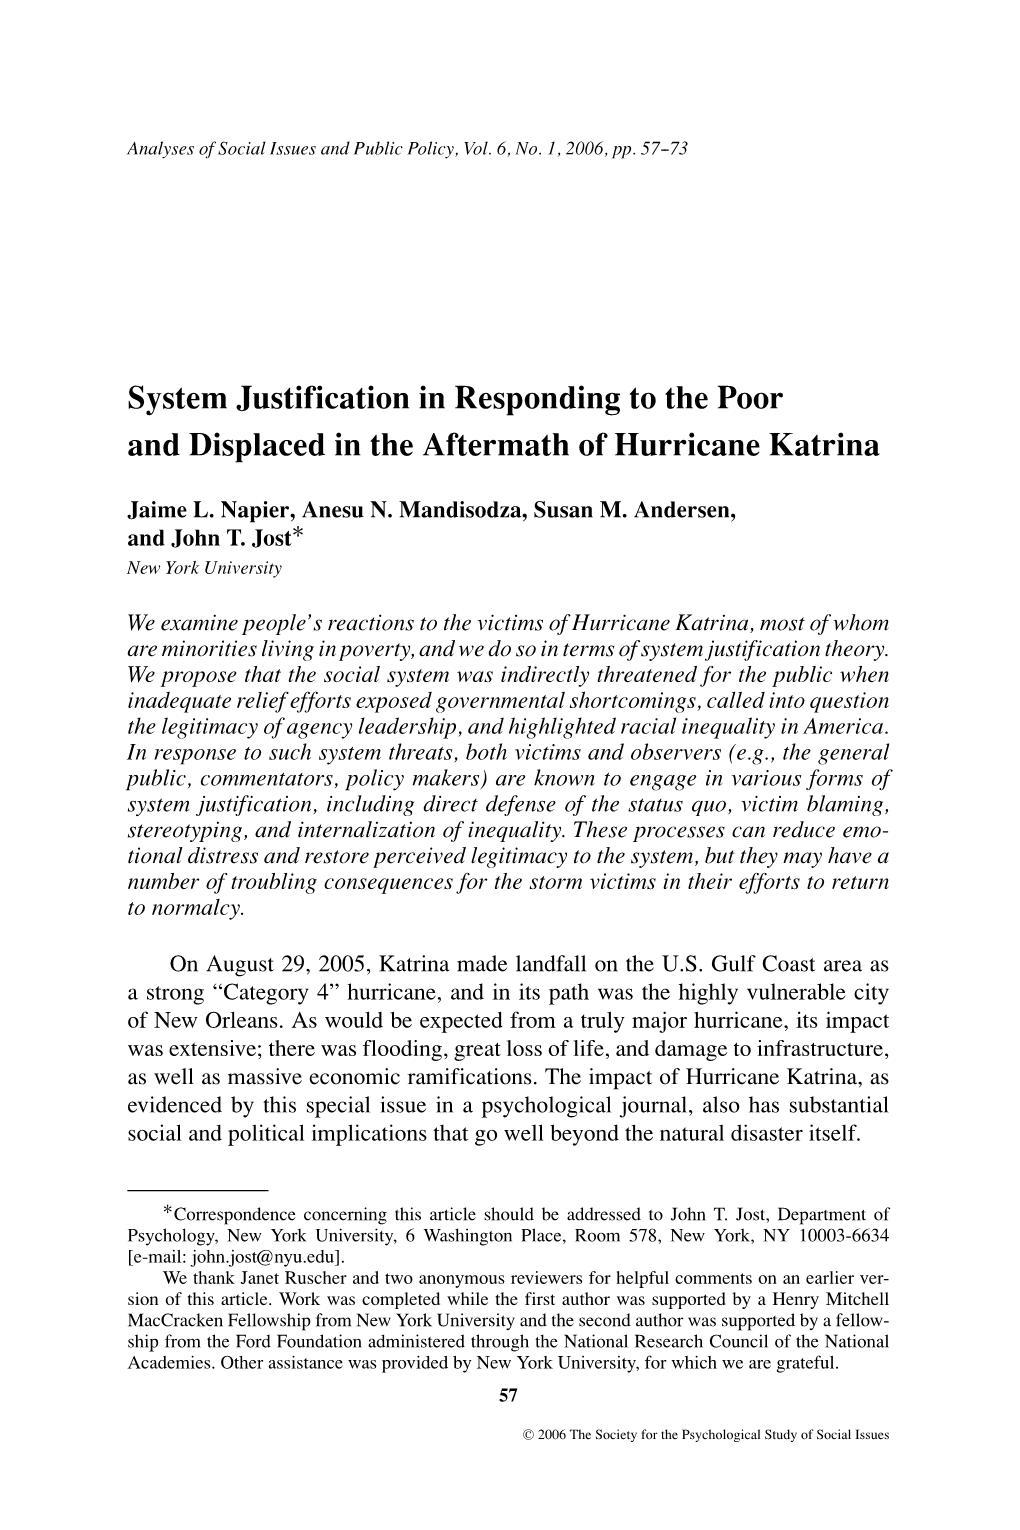 System Justification in Responding to the Poor and Displaced in the Aftermath of Hurricane Katrina